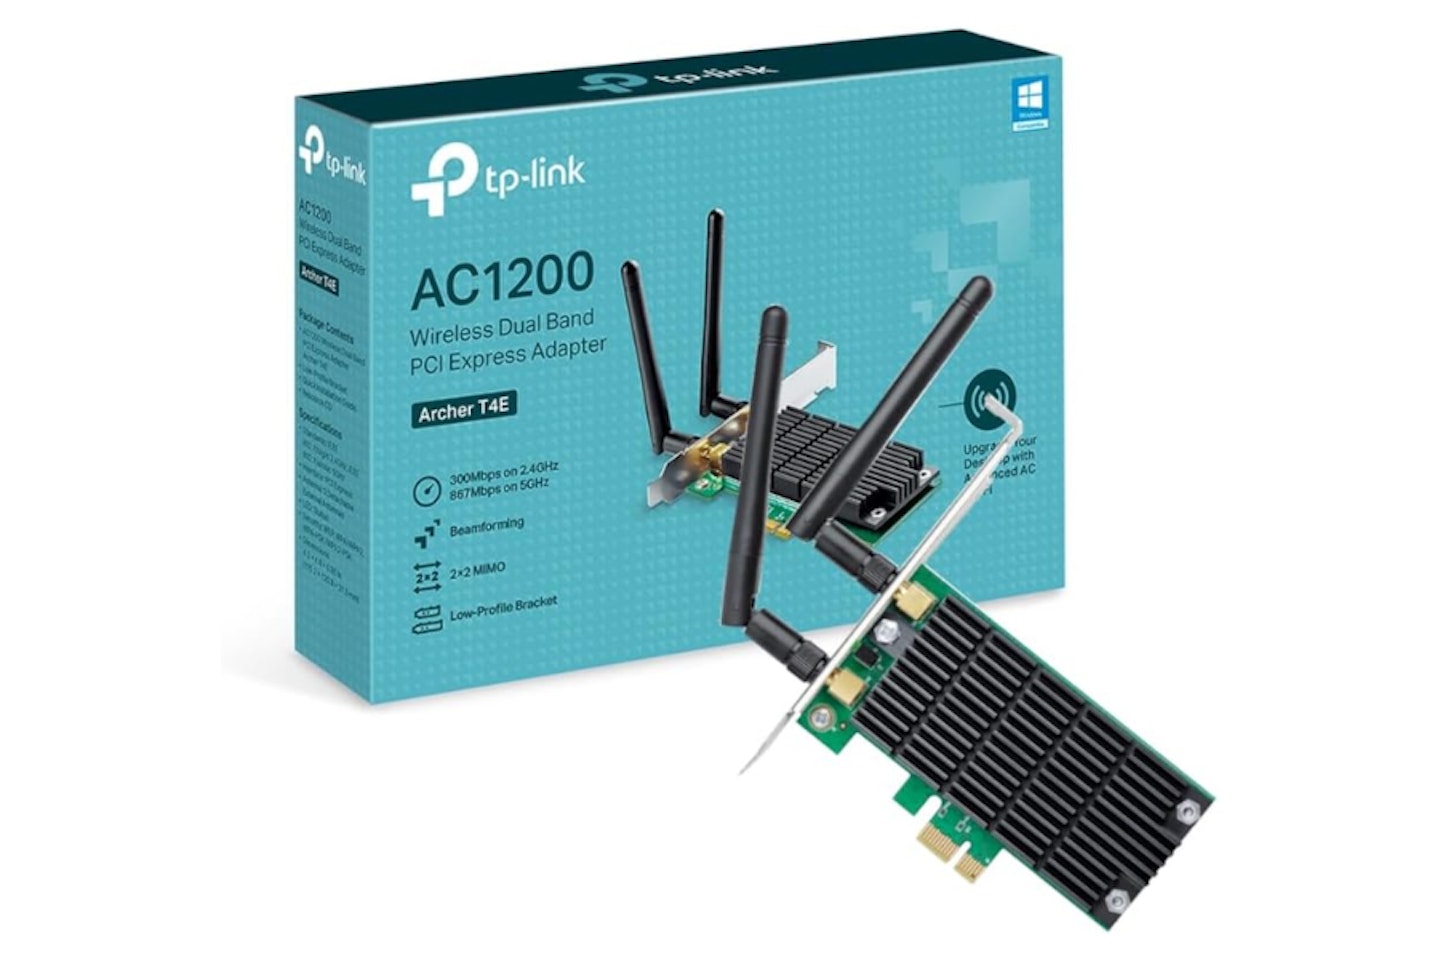 TP-Link AC1200 Archer T4E Dual Band Wireless PCI Express Adapter  - possibly the best wifi card for gaming